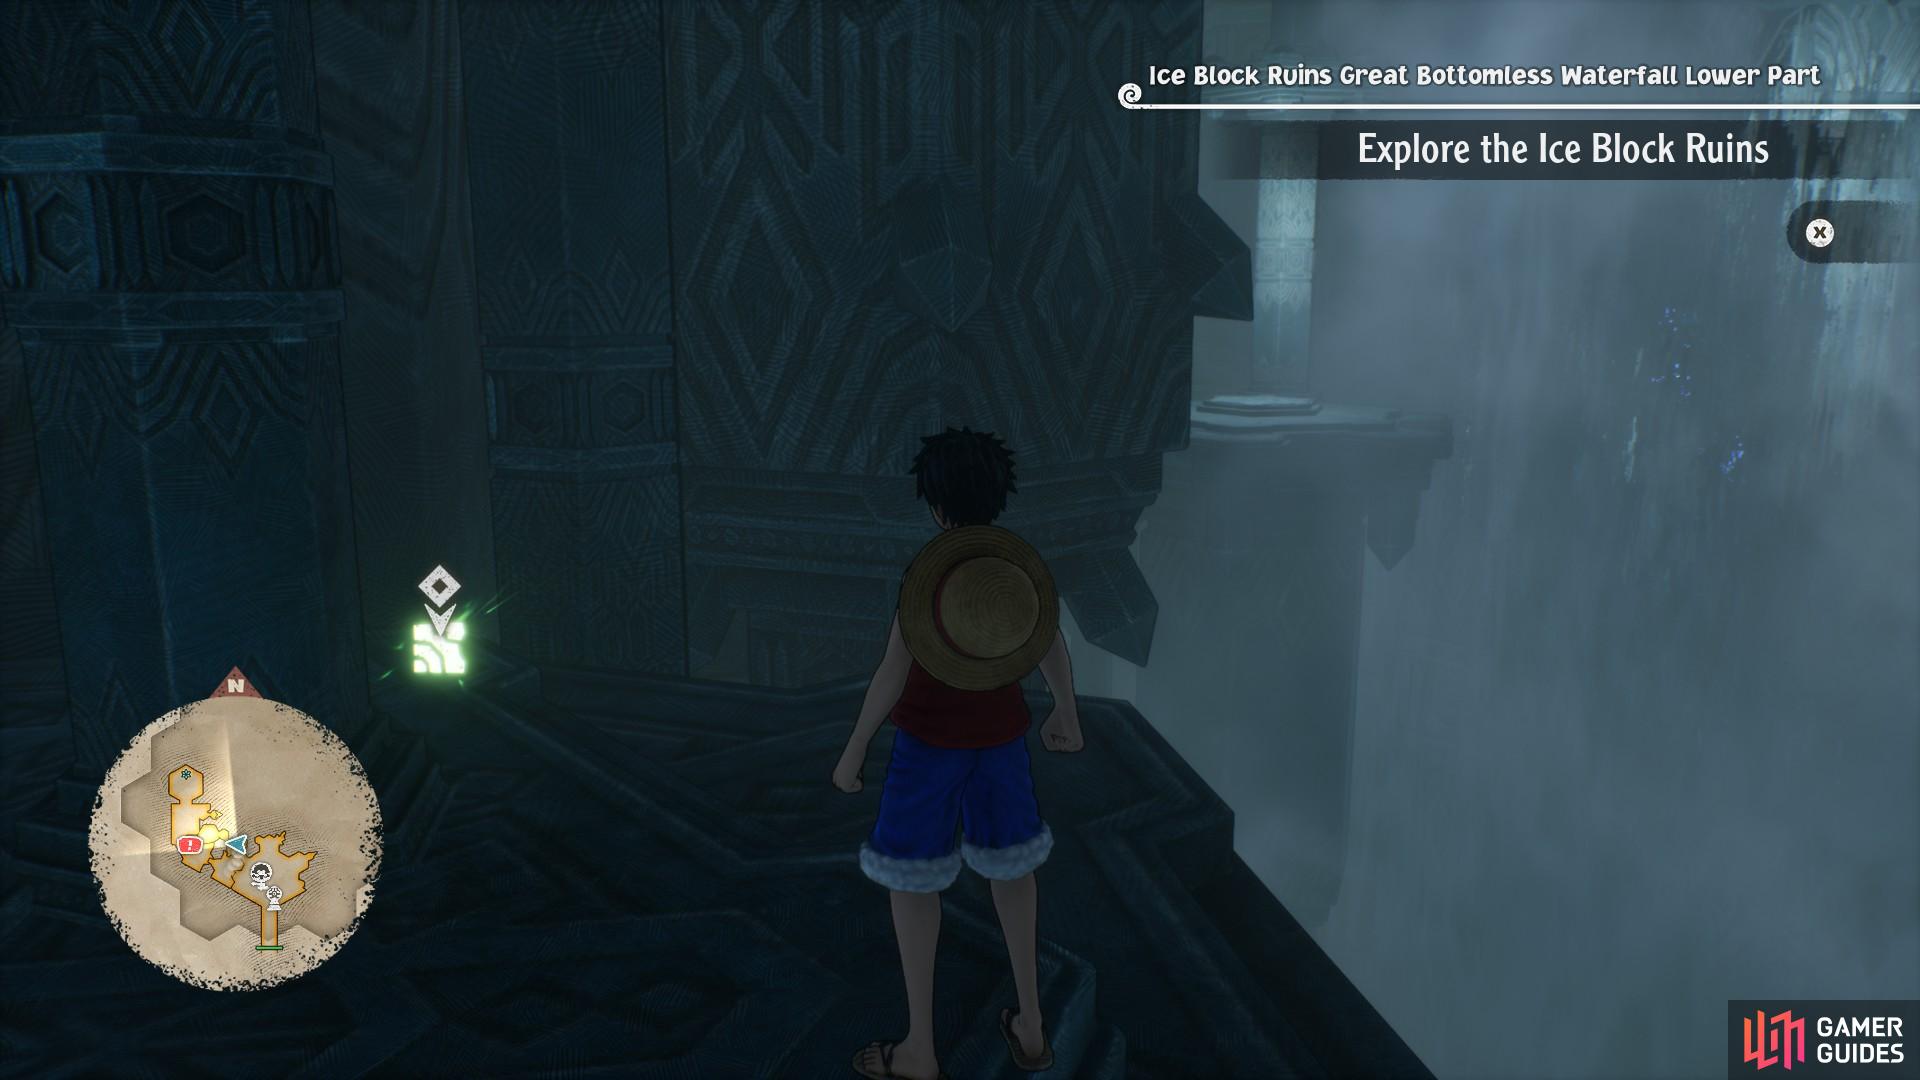 In the very first room of the Ice Block Ruins